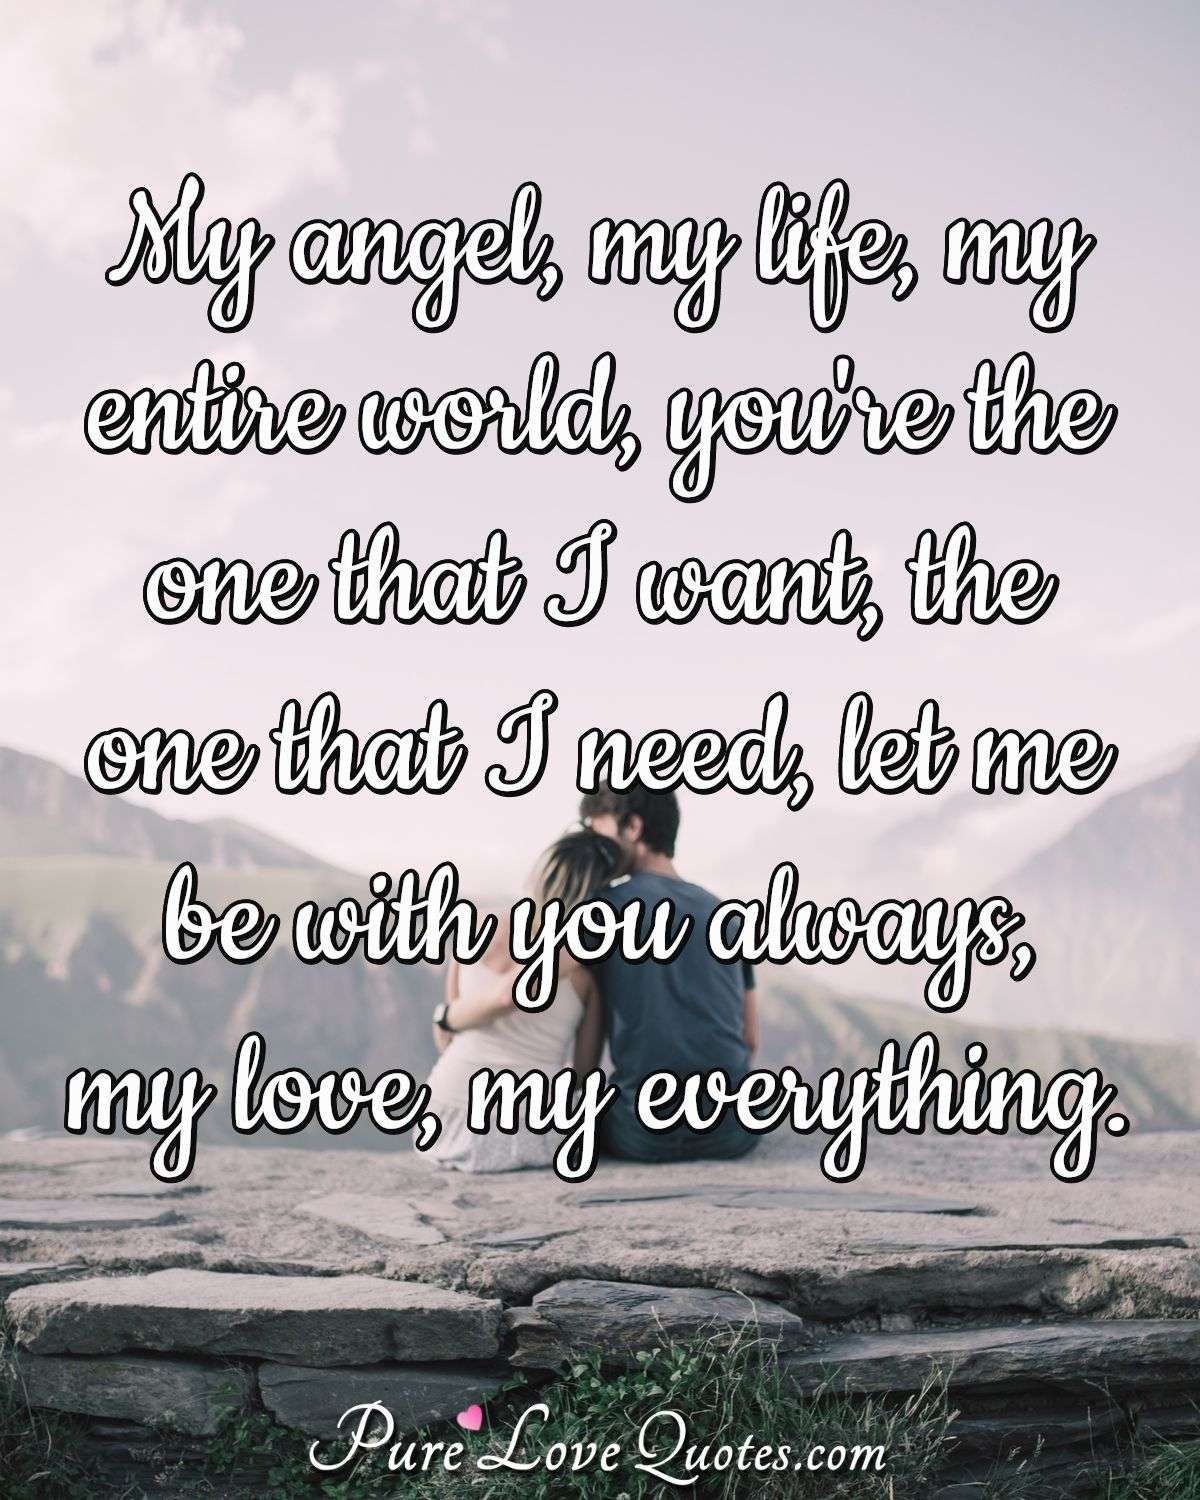 You are my everything quotes